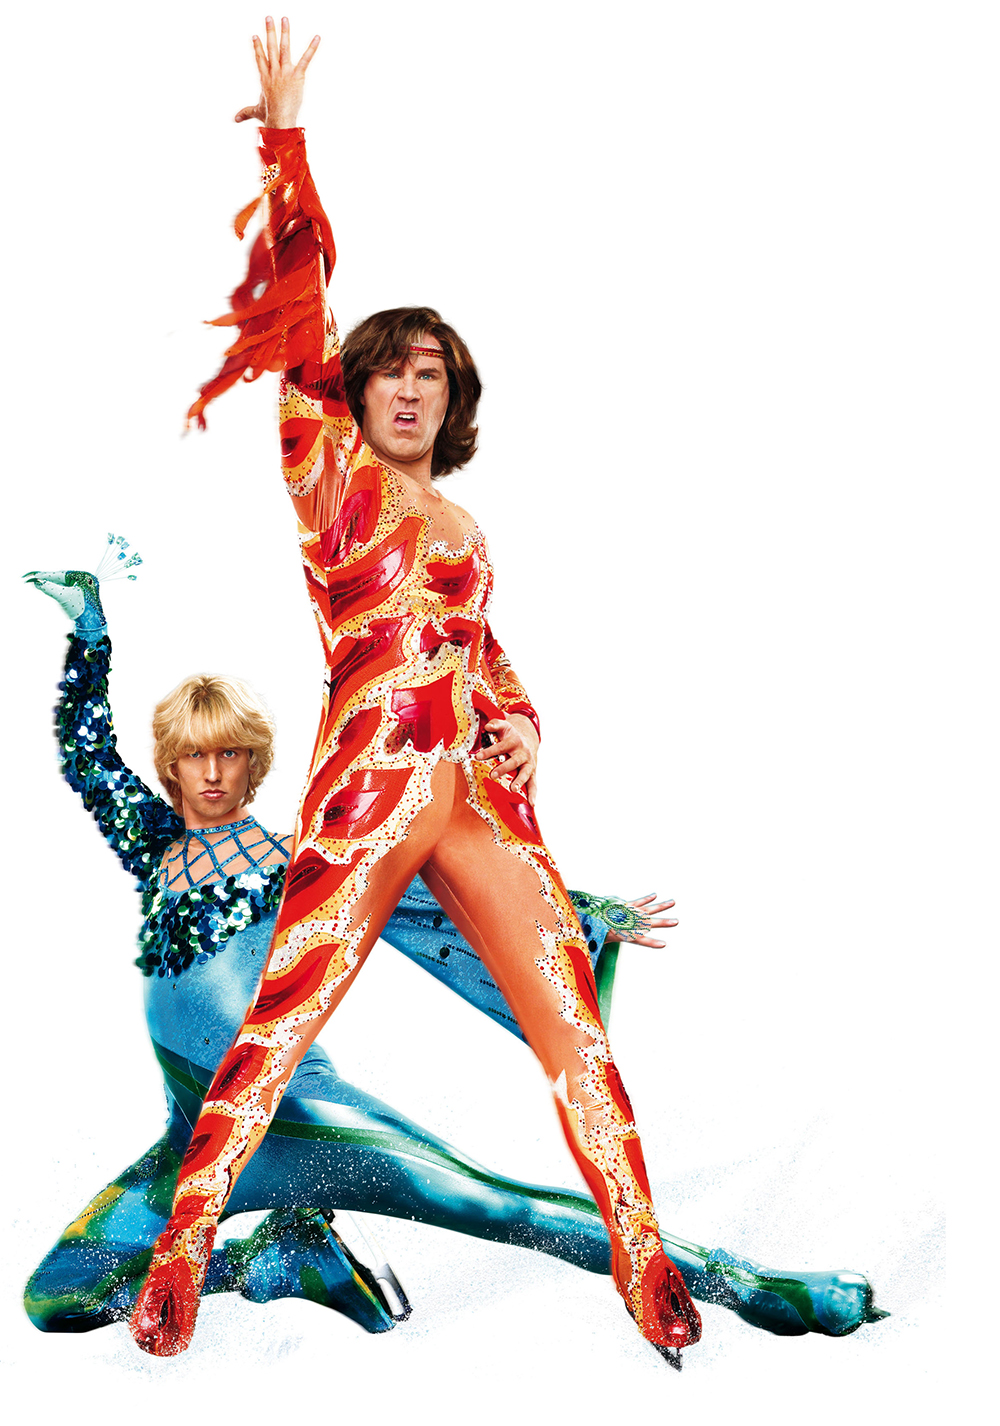 View, Download, Rate, and Comment on this Blades of Glory Movie Poster. ima...